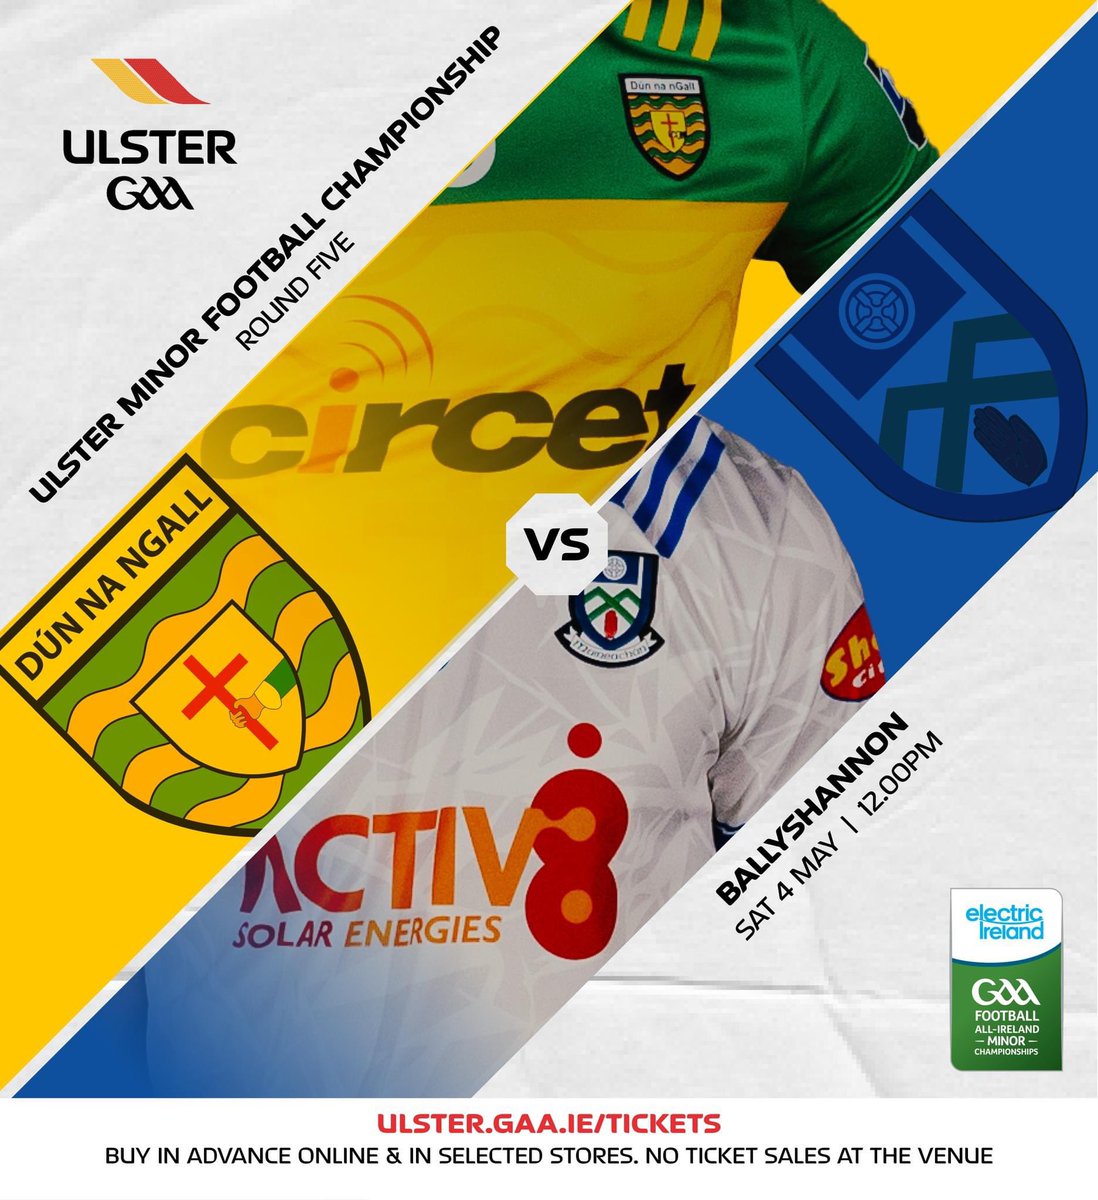 2024 @ElectricIreland @UlsterGAA Minor Football Championship Round Five🏐

Official Donegal GAA 🟨🟩v Monaghan ⬜️🟦  

🎟️ Buy tickets in advance online. No sales at venue
➡️ universe.com/events/electri…

#Ulster2024 #ThisIsMajor